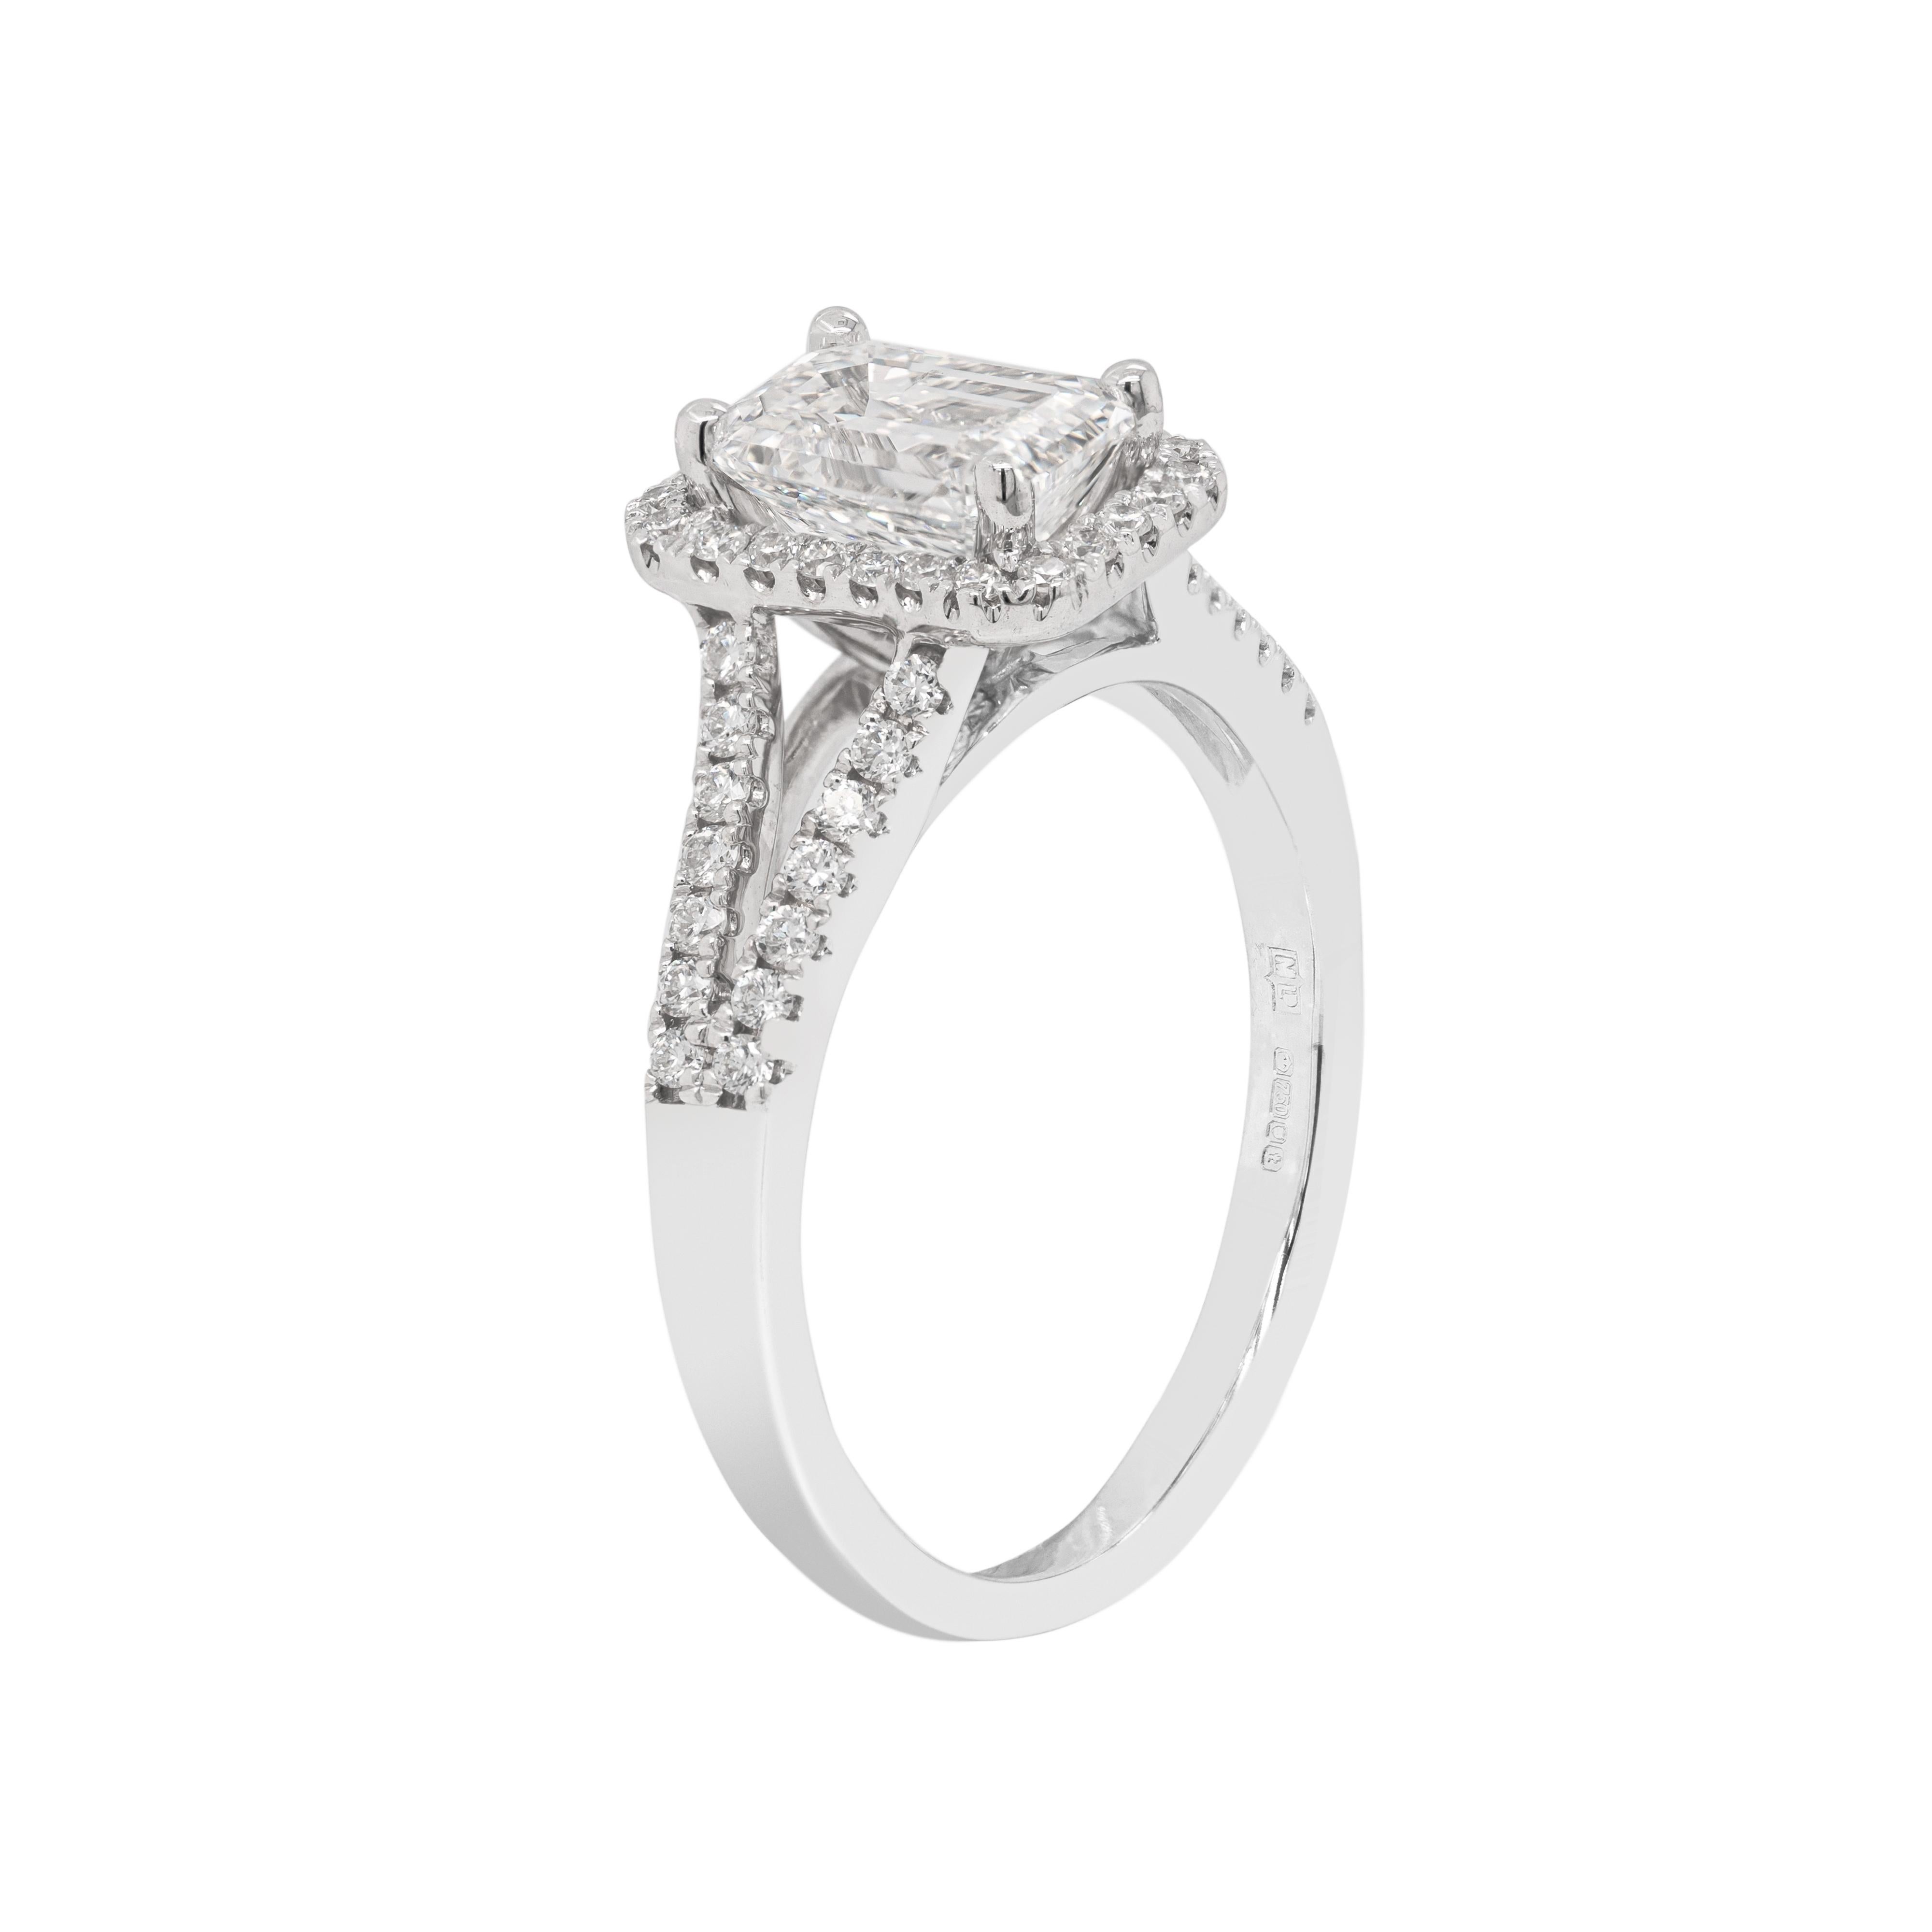 This elegant engagement ring features a GIA certified 1.20 carat emerald cut diamond, graded H, SI2. The gorgeous stone is beautifully surrounded by a halo of round brilliant cut diamonds sat atop a diamond set split shank making the total diamond